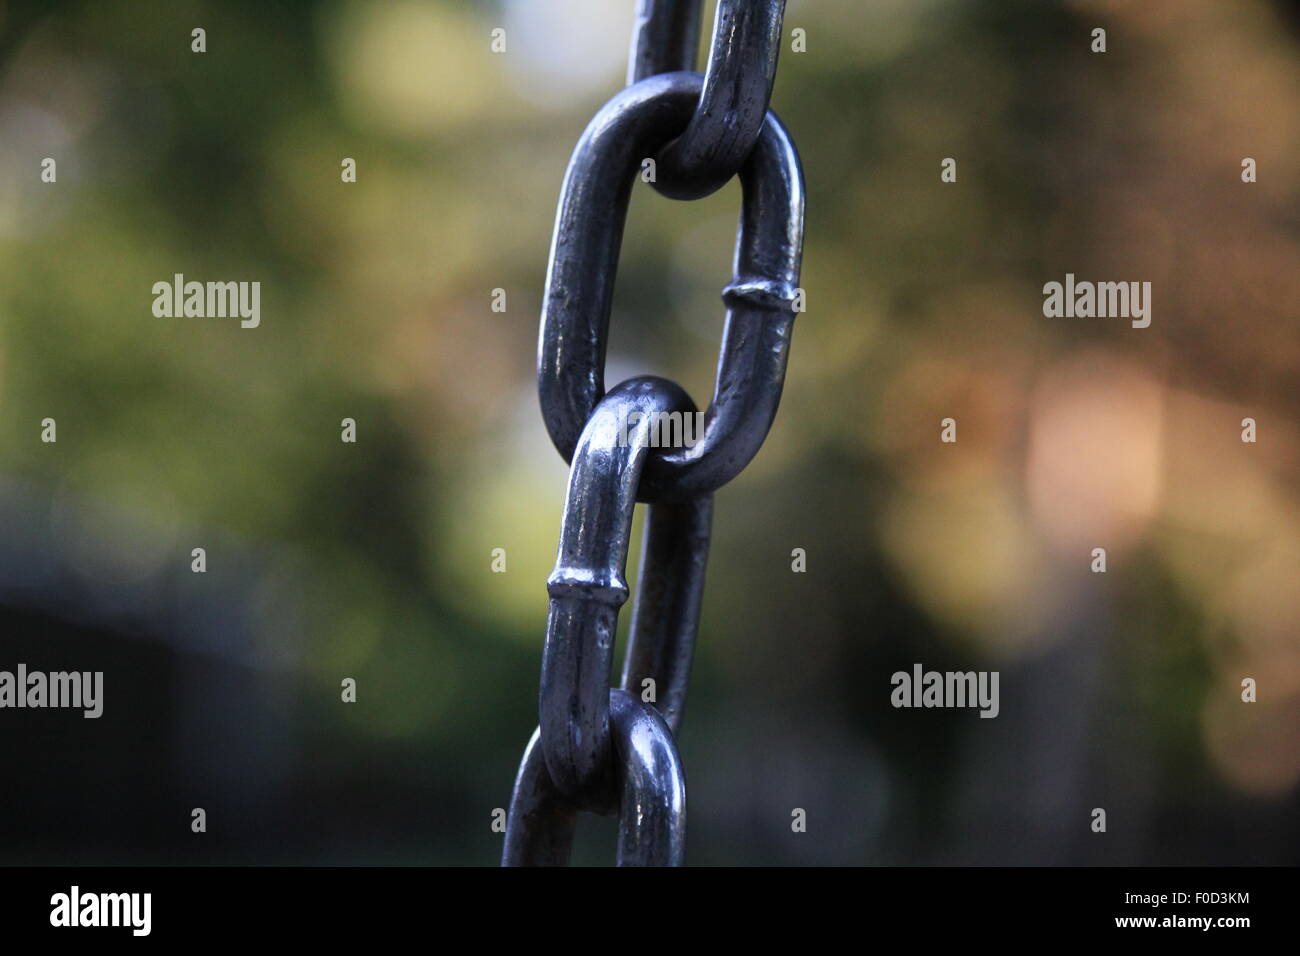 close up photo of a chain, creative Stock Photo